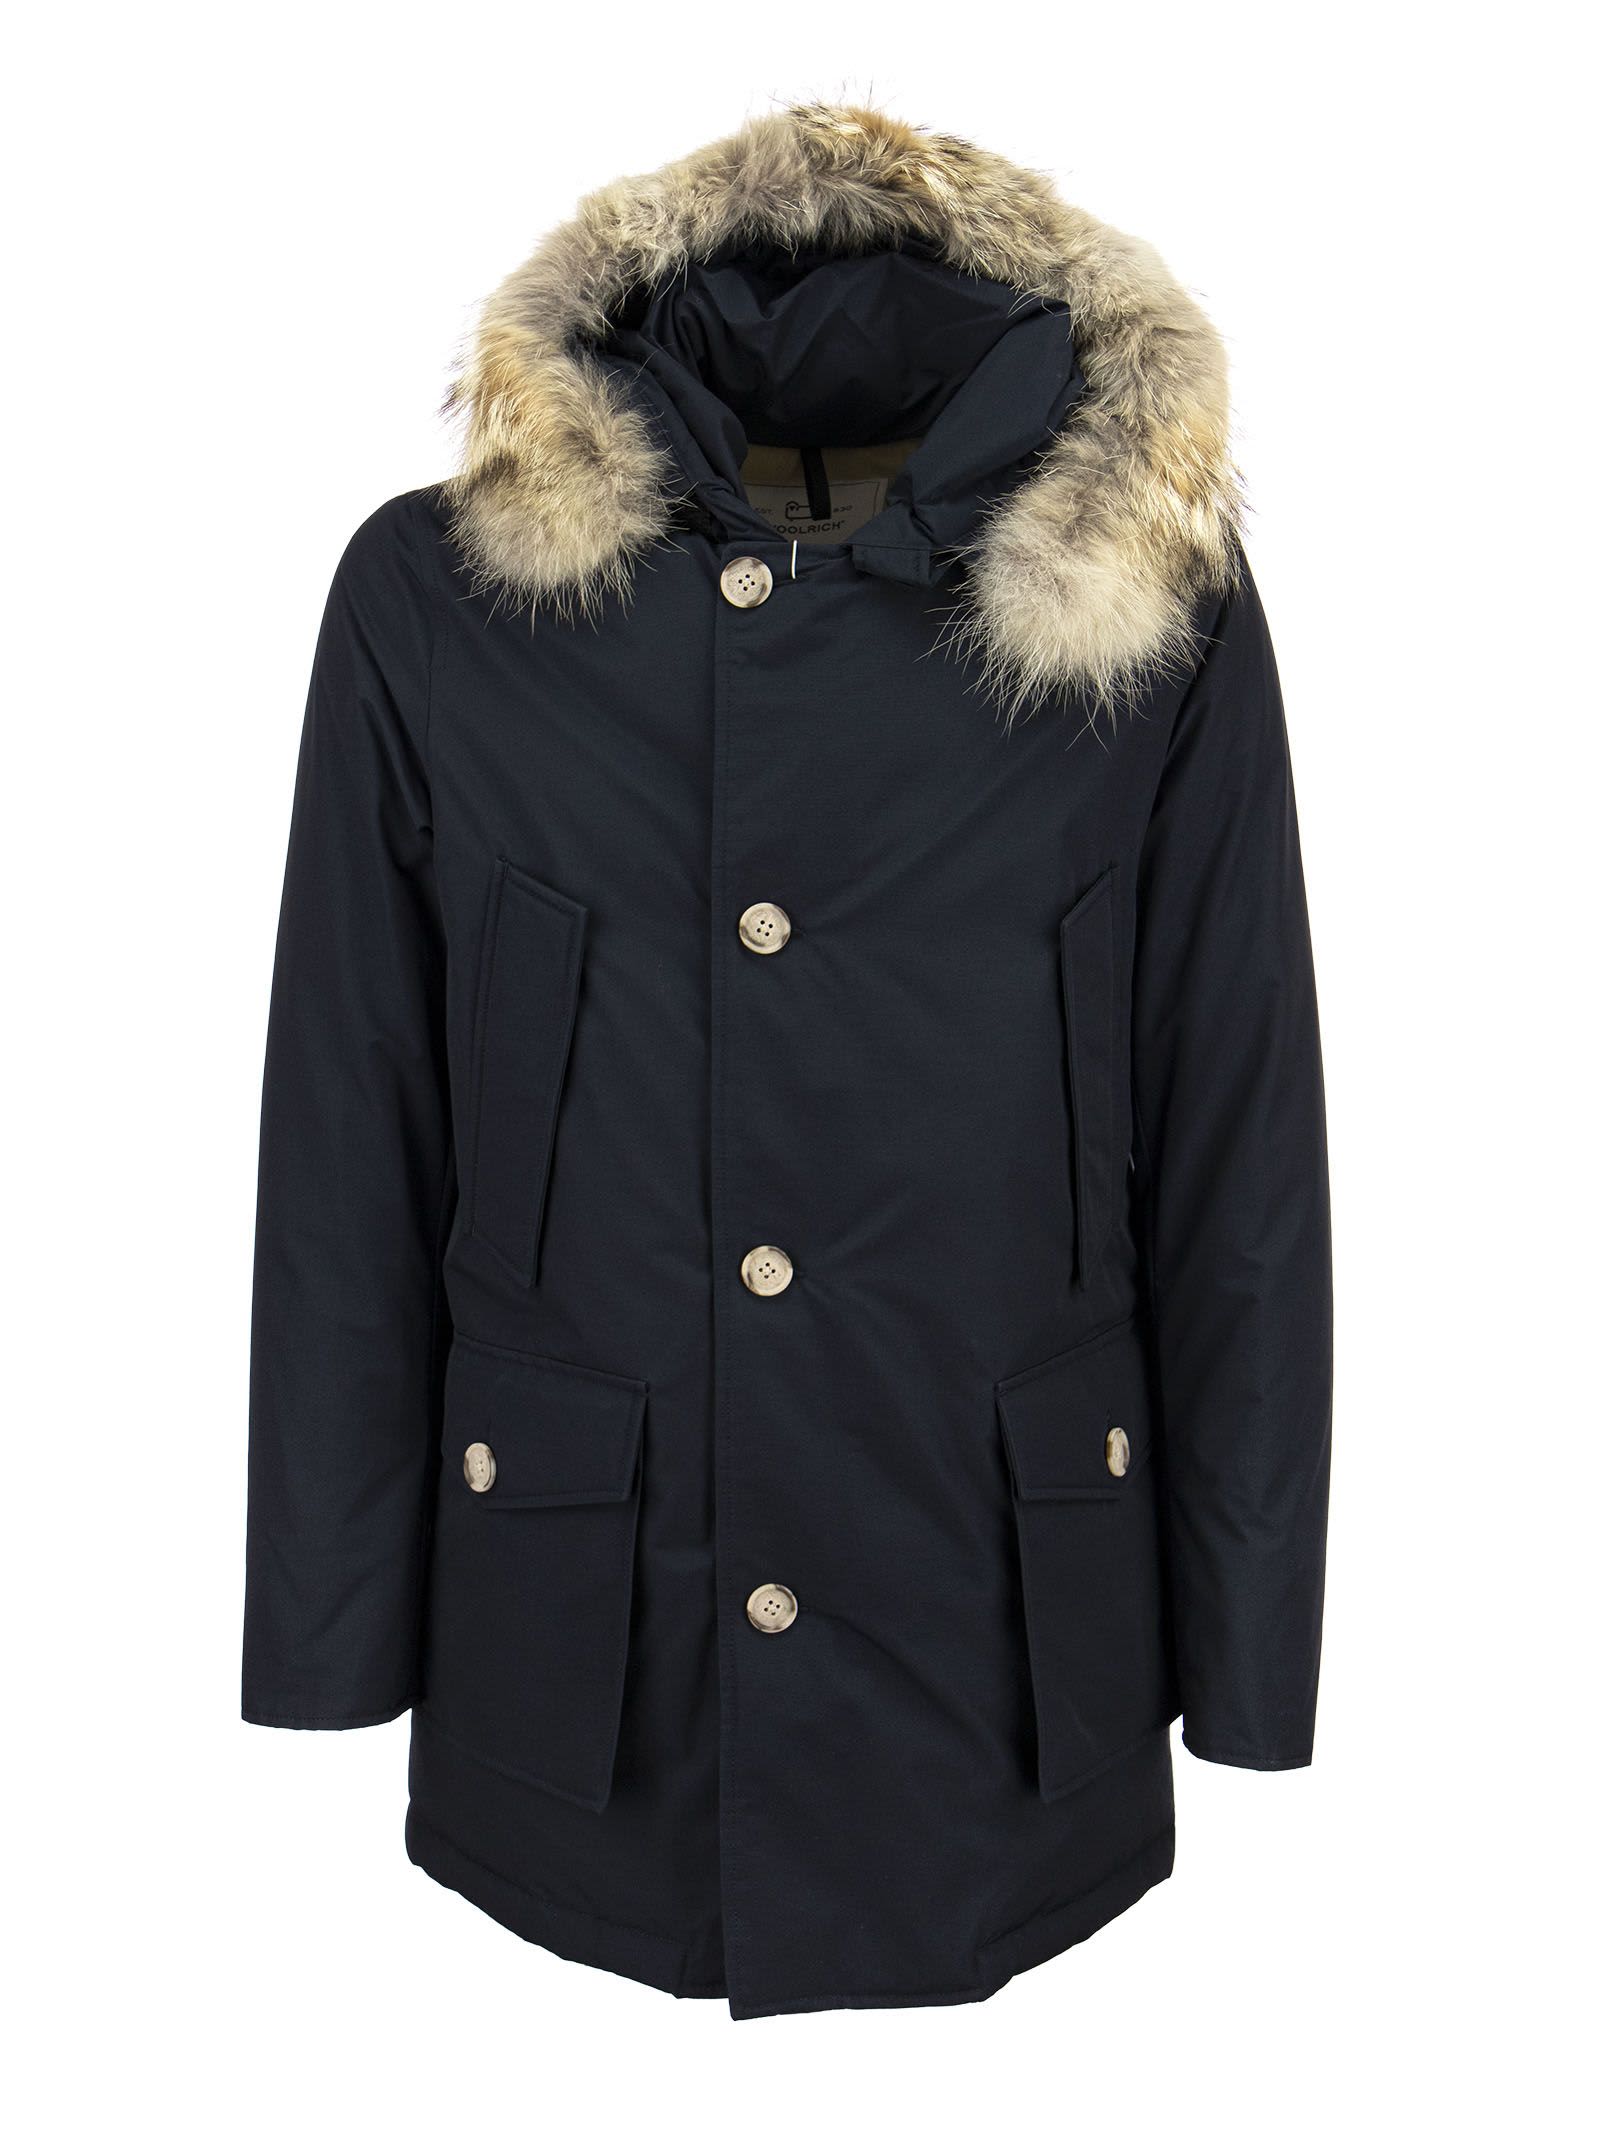 Woolrich Arctic Parka With Removable Fur Coat